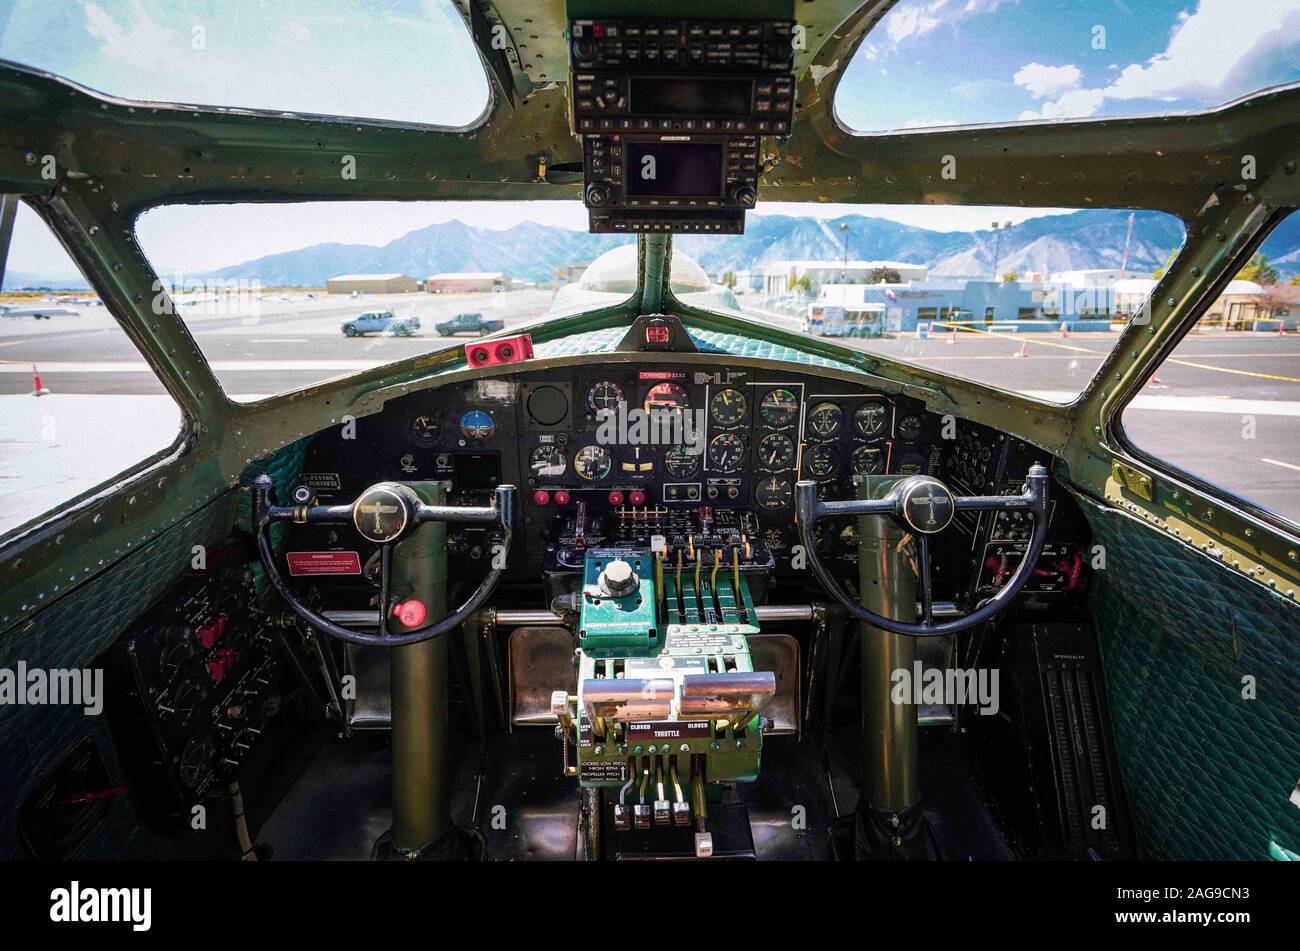 Interior of a B-17 bomber plane from WWII in an airport Stock Photo - Alamy